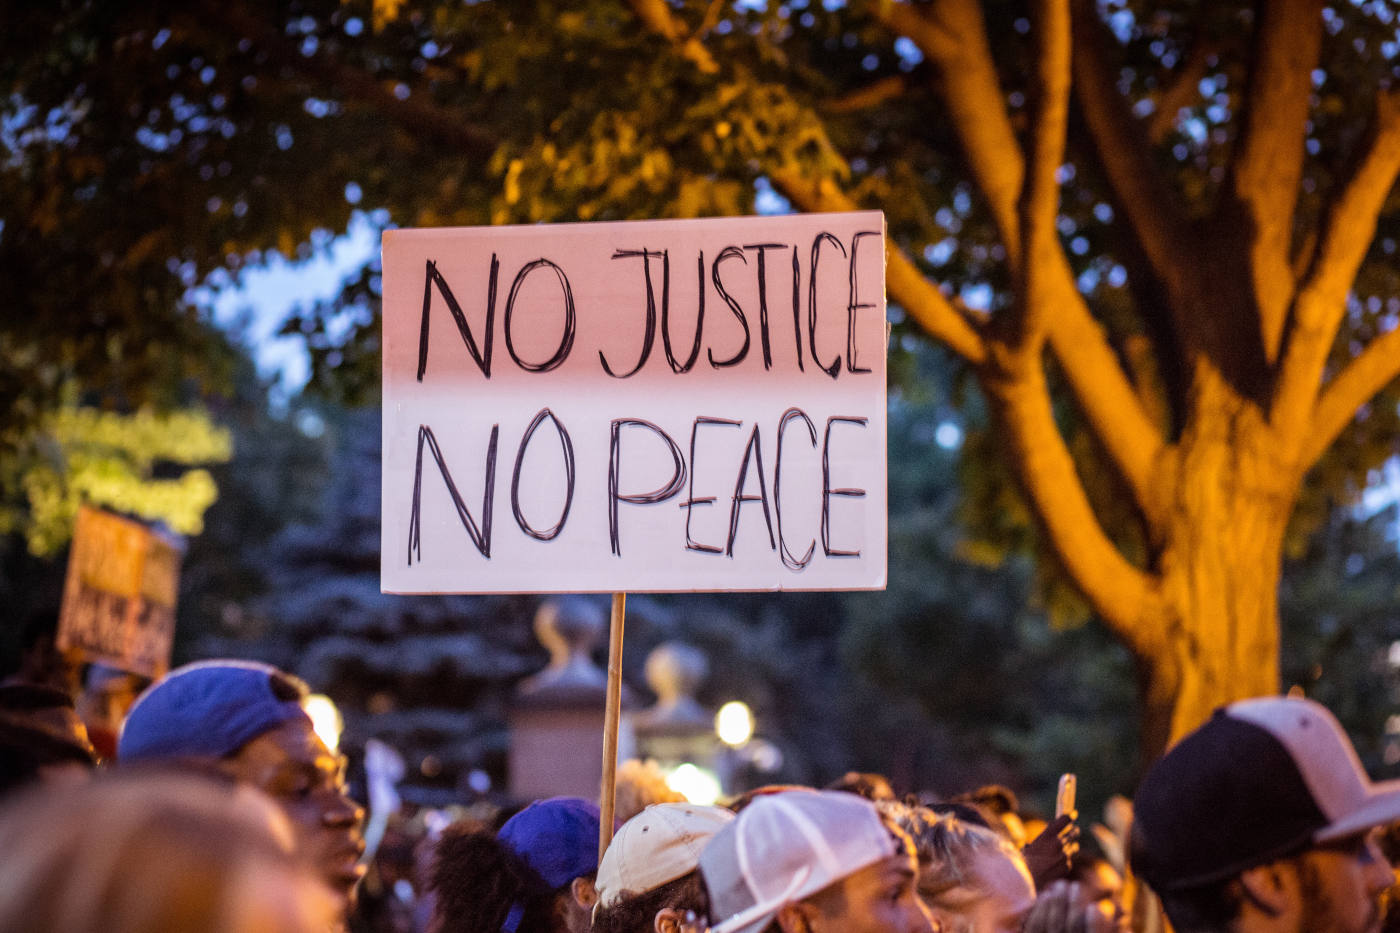 No Justice, No Peace - Justice for Philando Castile - St. Paul, Minnesota | Source: diversey on Flickr | License: CC-BY-SA 2.0